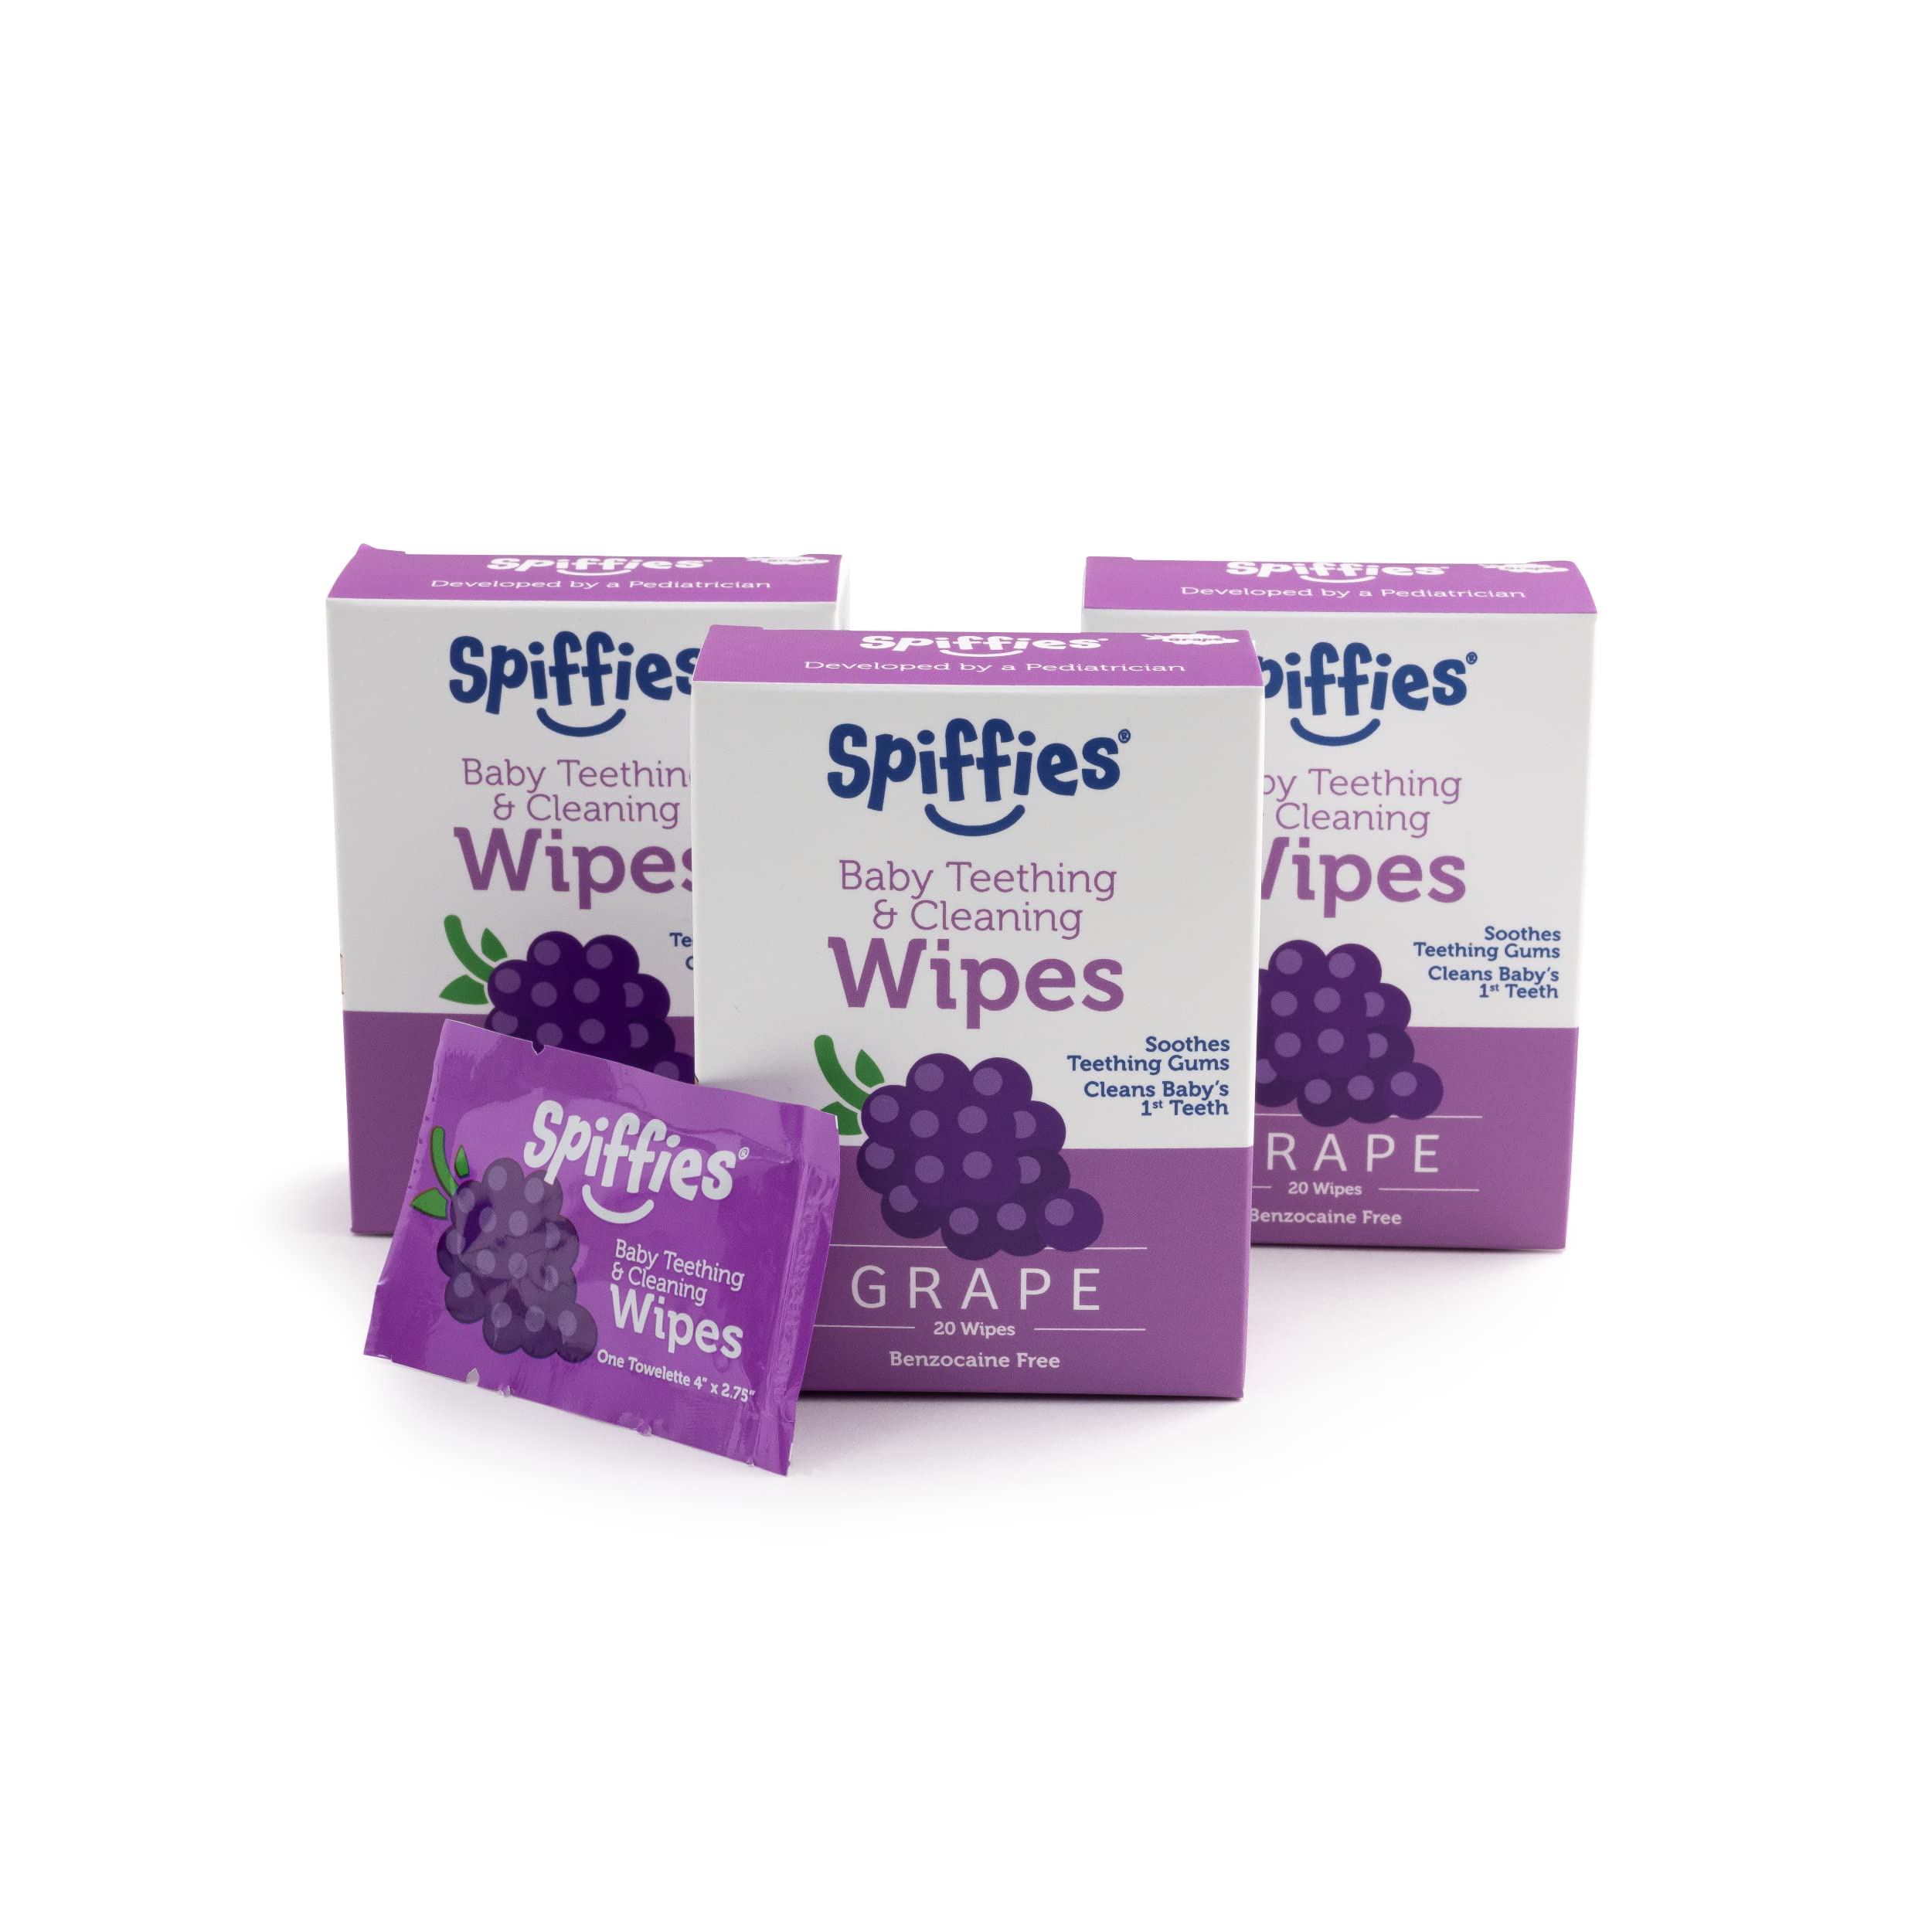 Spiffies Baby Oral Care Tooth Wipes - Gum & Teeth Wipe Tissues for Teething Relief & Cleaning Infant & Toddler Teeth - Baby Tooth Wipes w/Xylitol for Ages 0-12 Months & Up (Grape, 20 Count, 3 Pack)